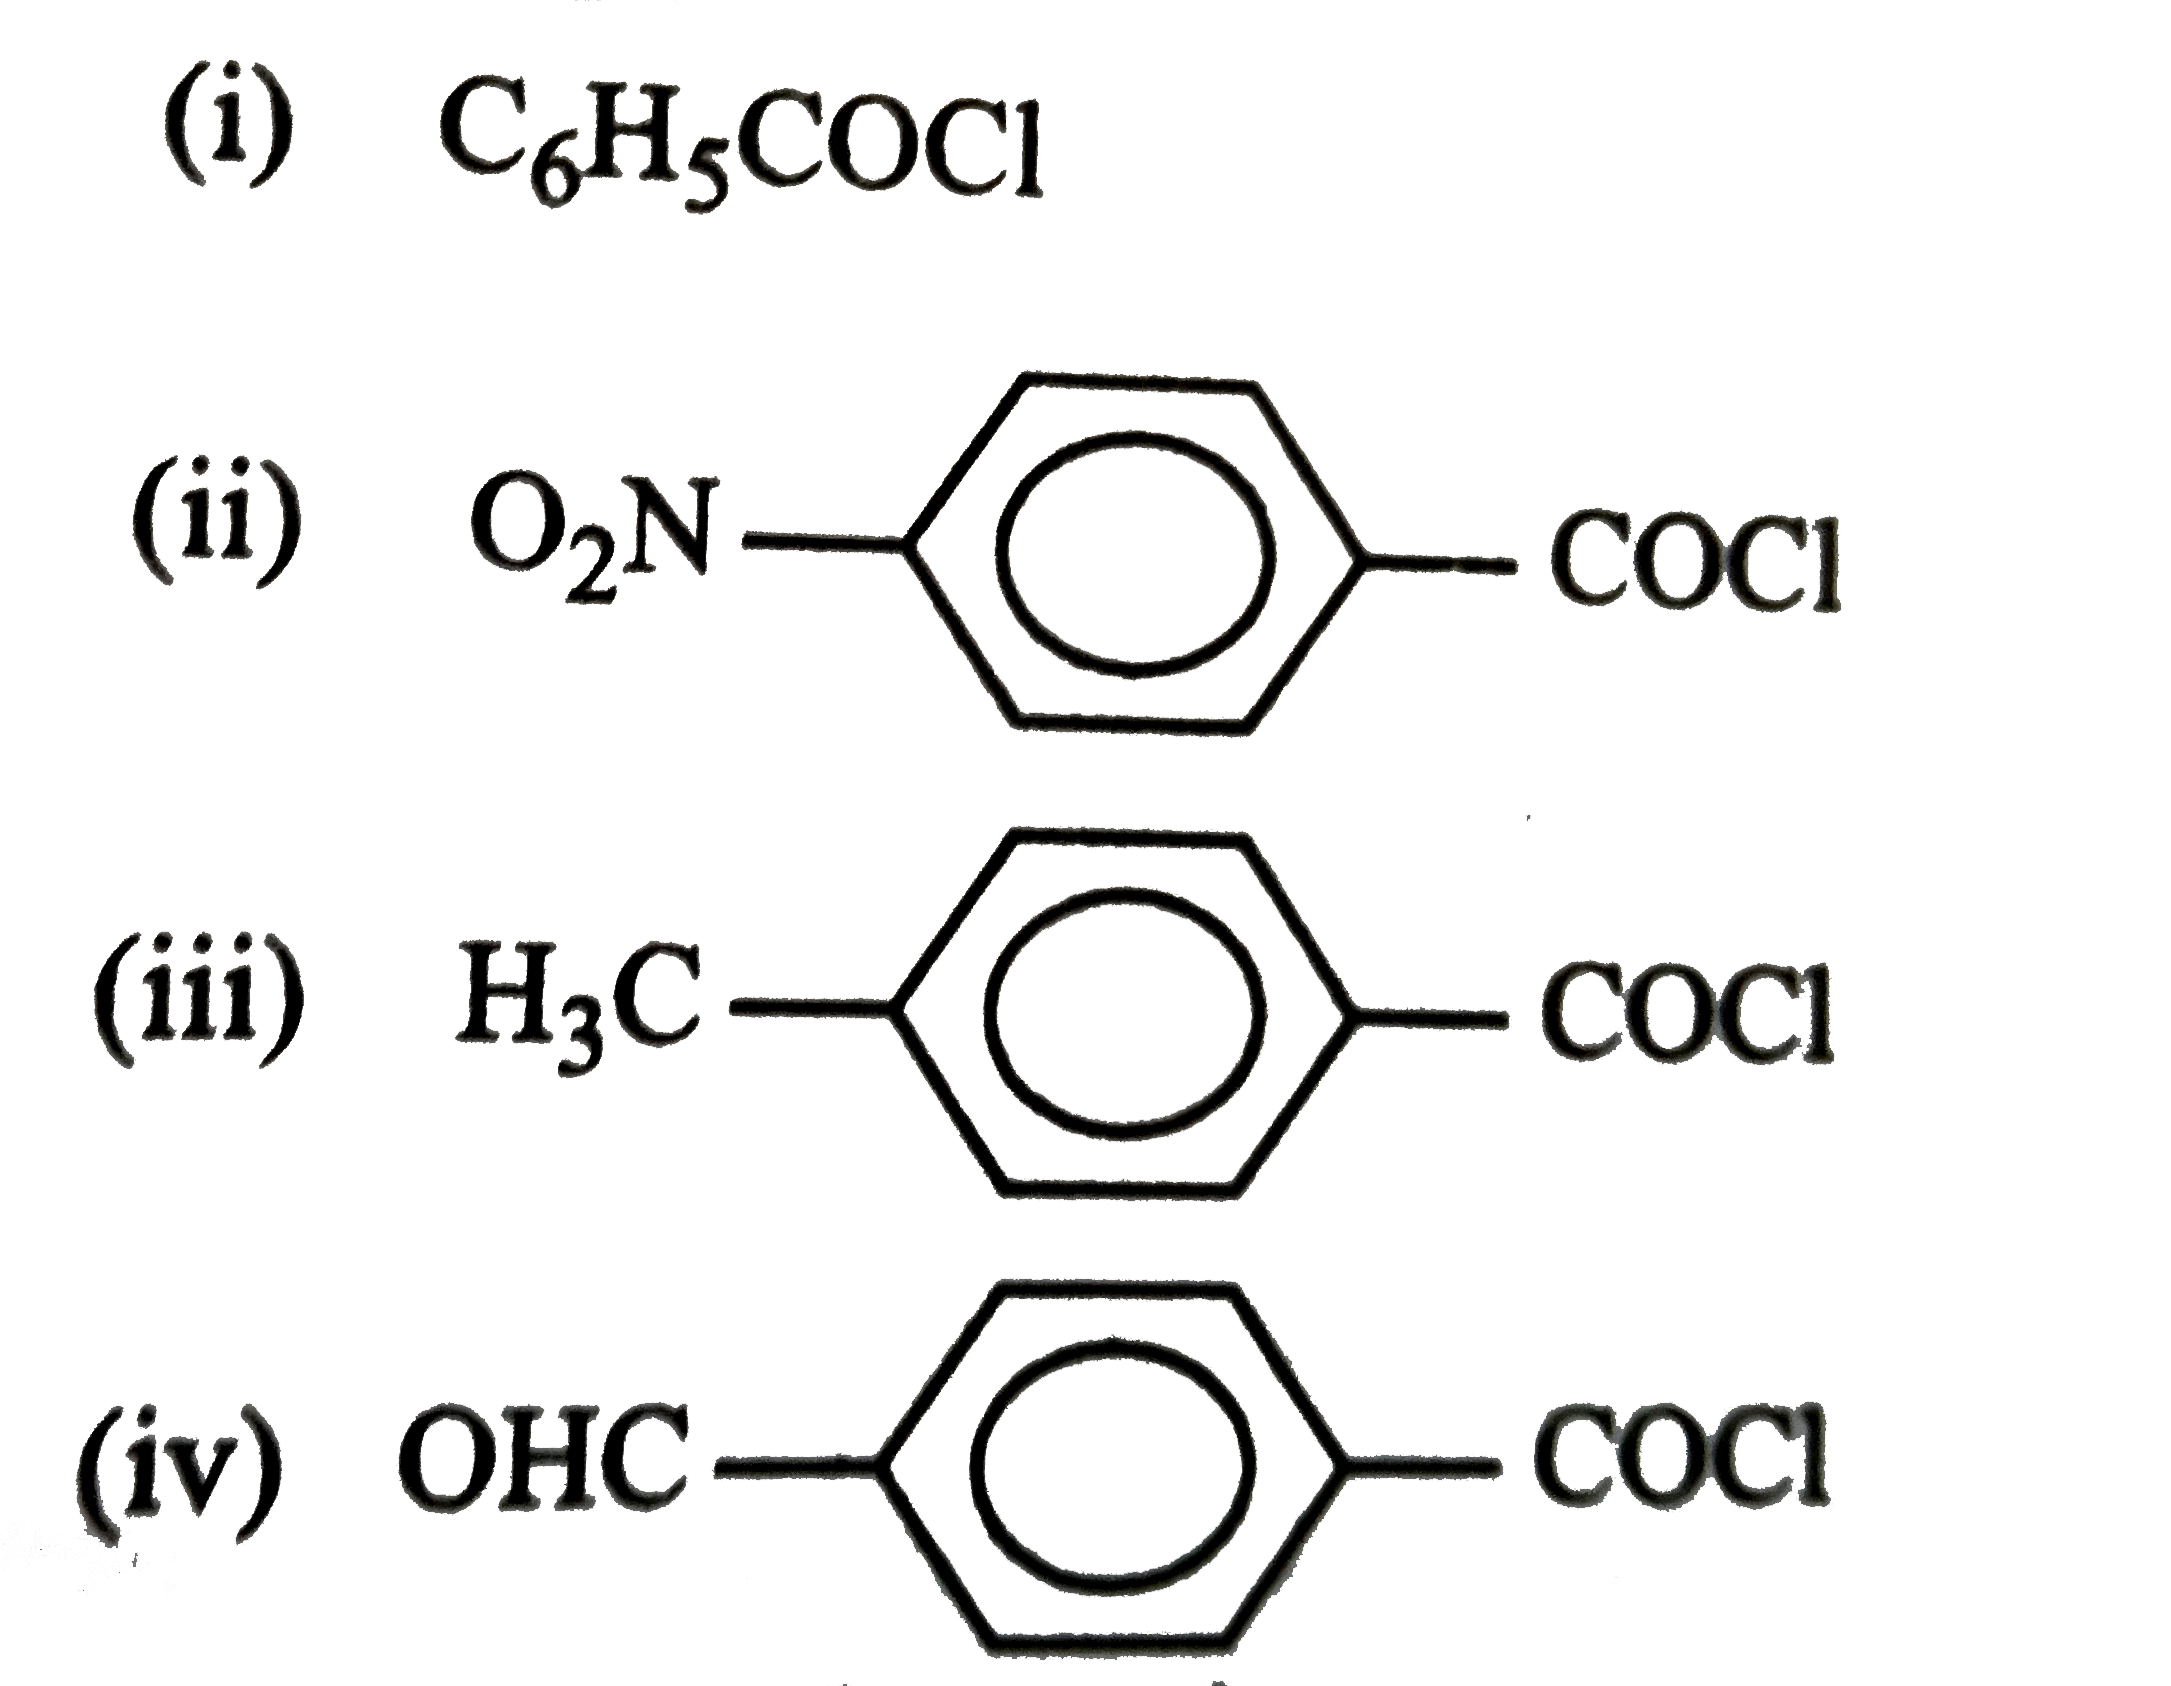 Consider the following compounds:      The correct decreasing order of their reactivity towards hydrolysis is: